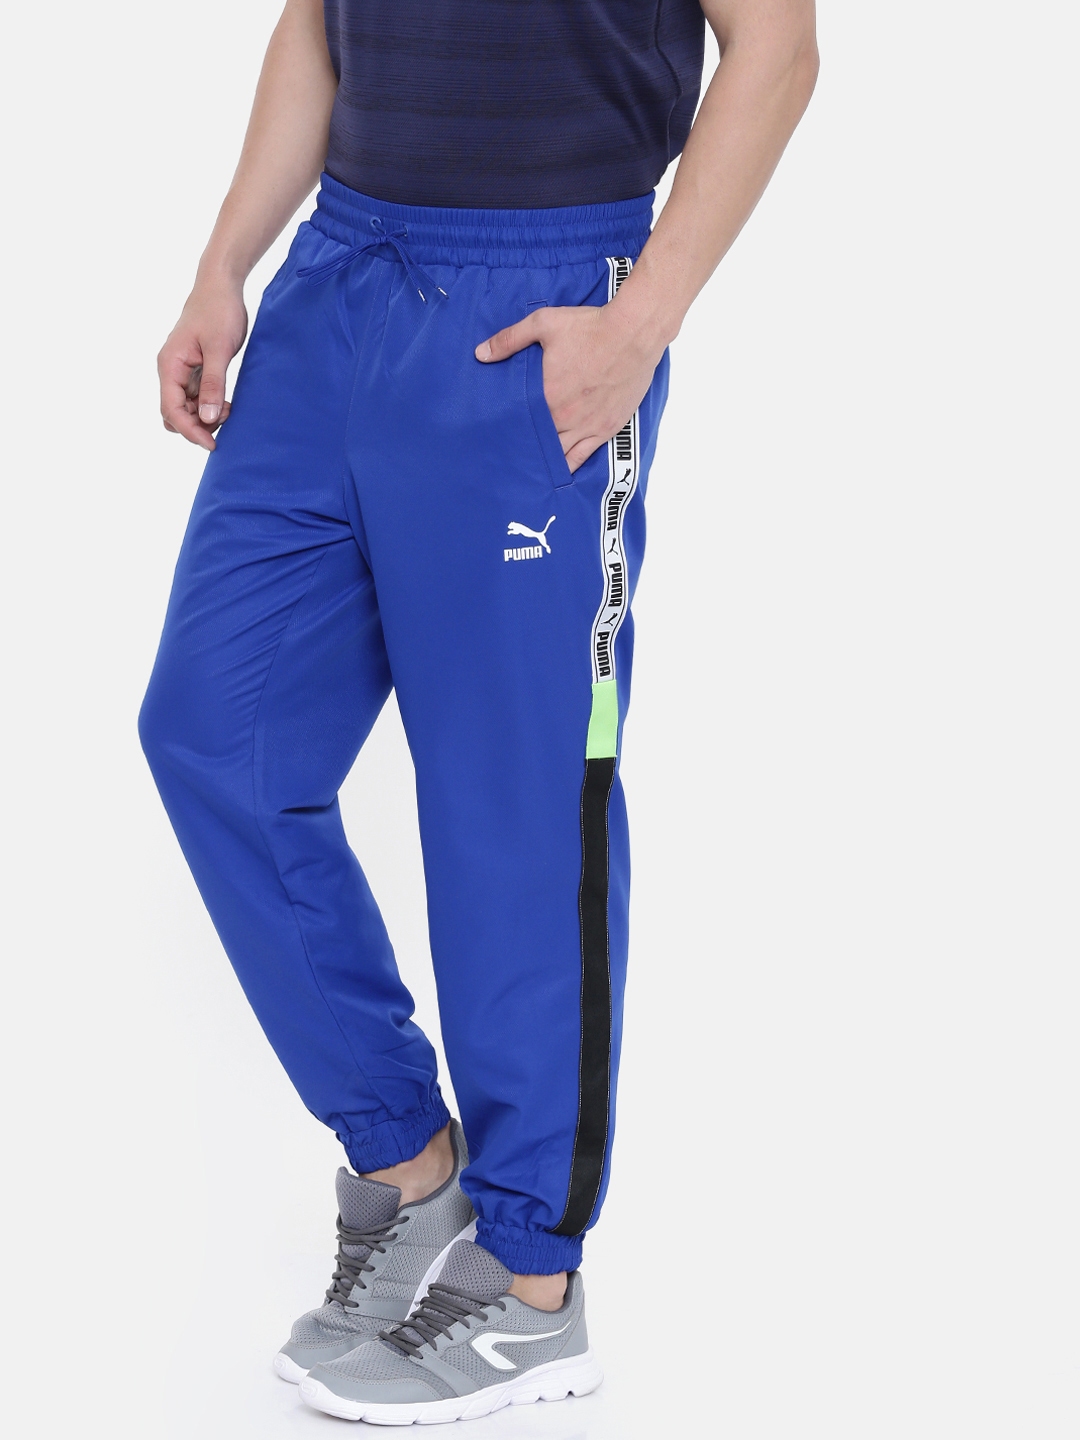 Top more than 72 woven jogger pants latest - in.eteachers